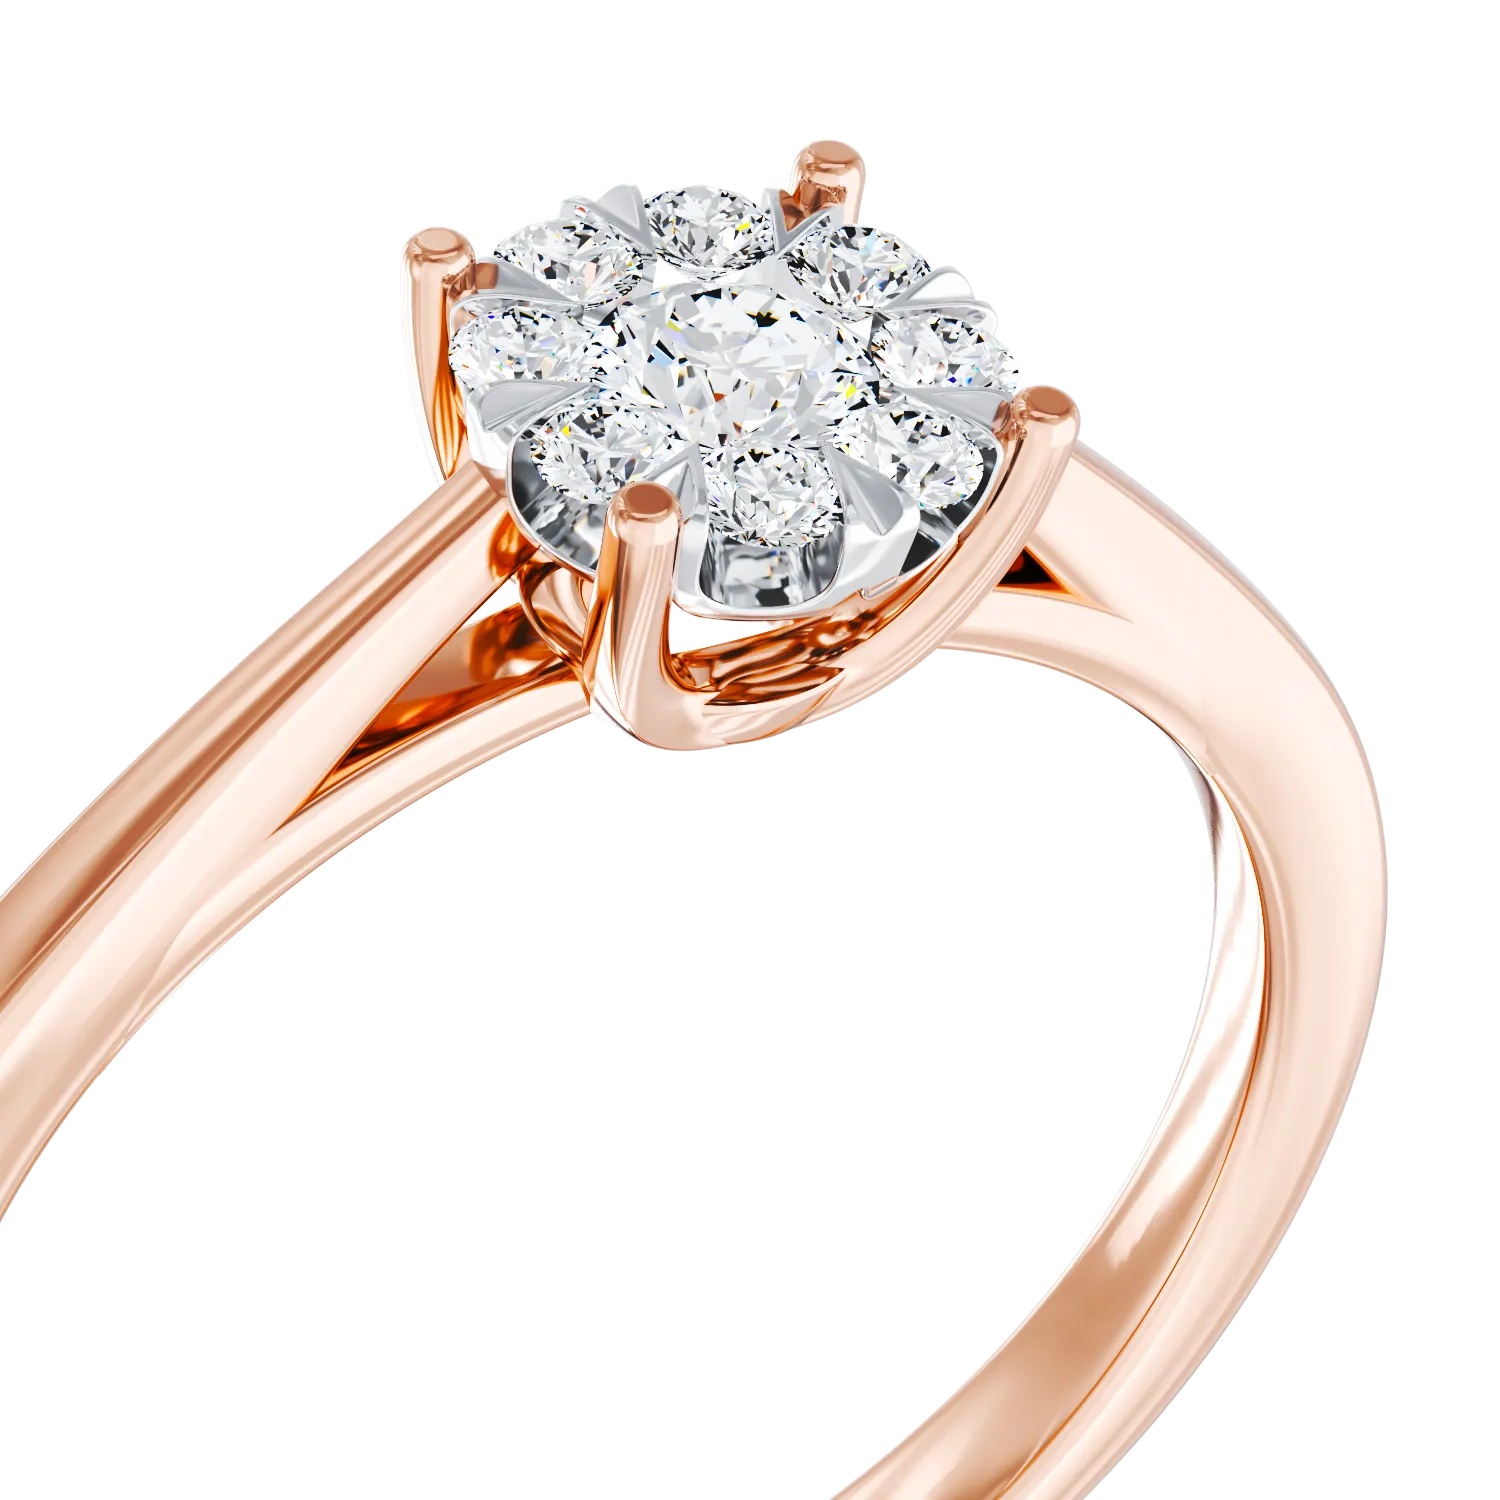 Rose gold engagement ring with 0.15ct diamonds